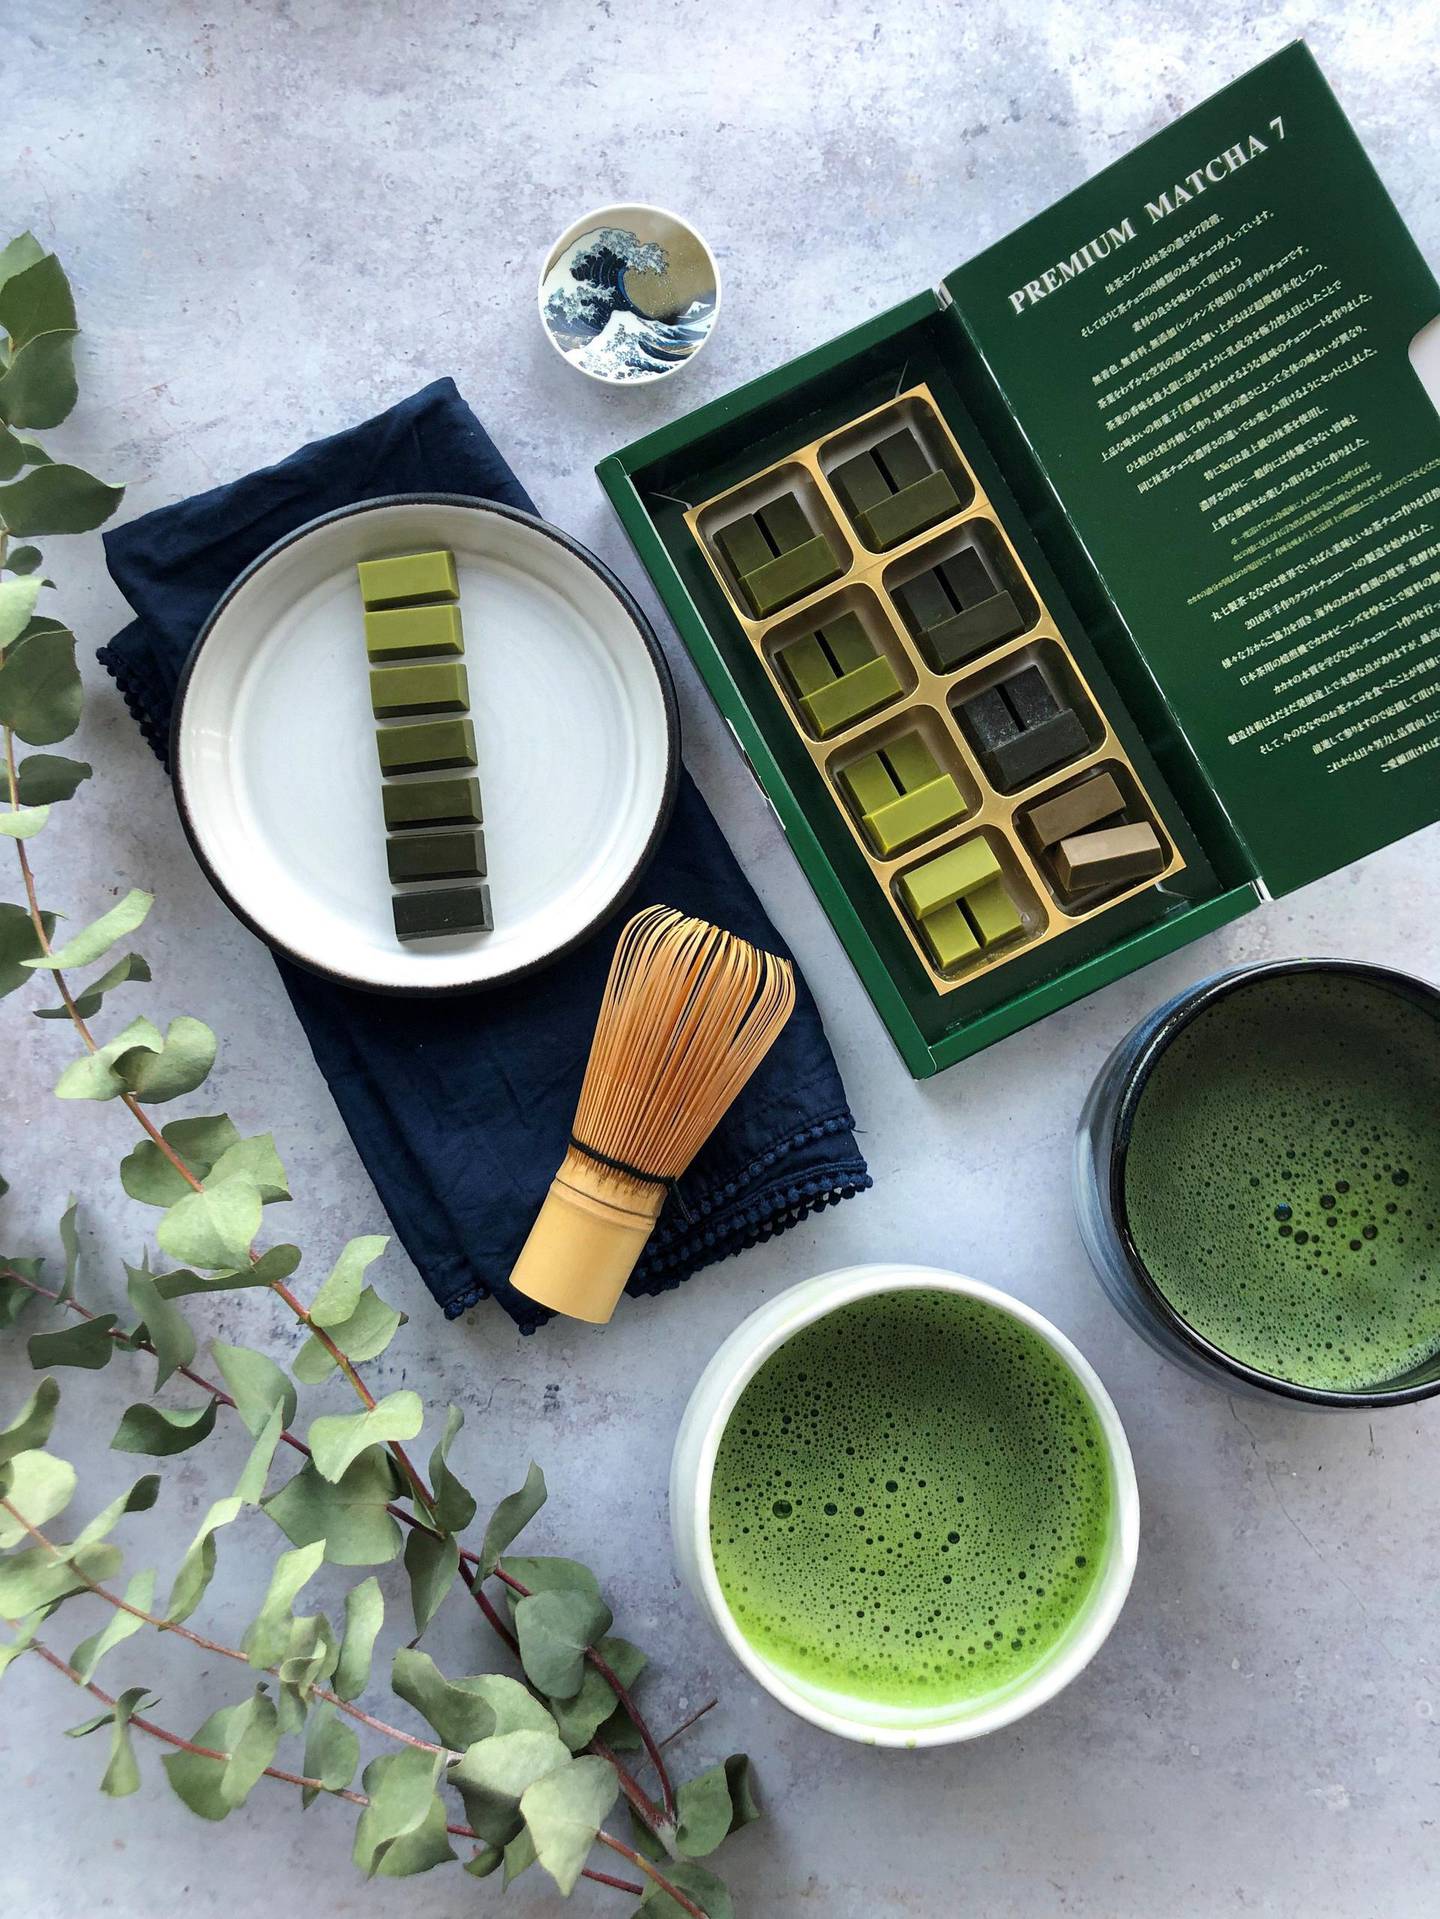 Spend your evening with a luxurious cup of matcha tea and chocolates. Courtesy Haiya Tariq / @passmethedimsum